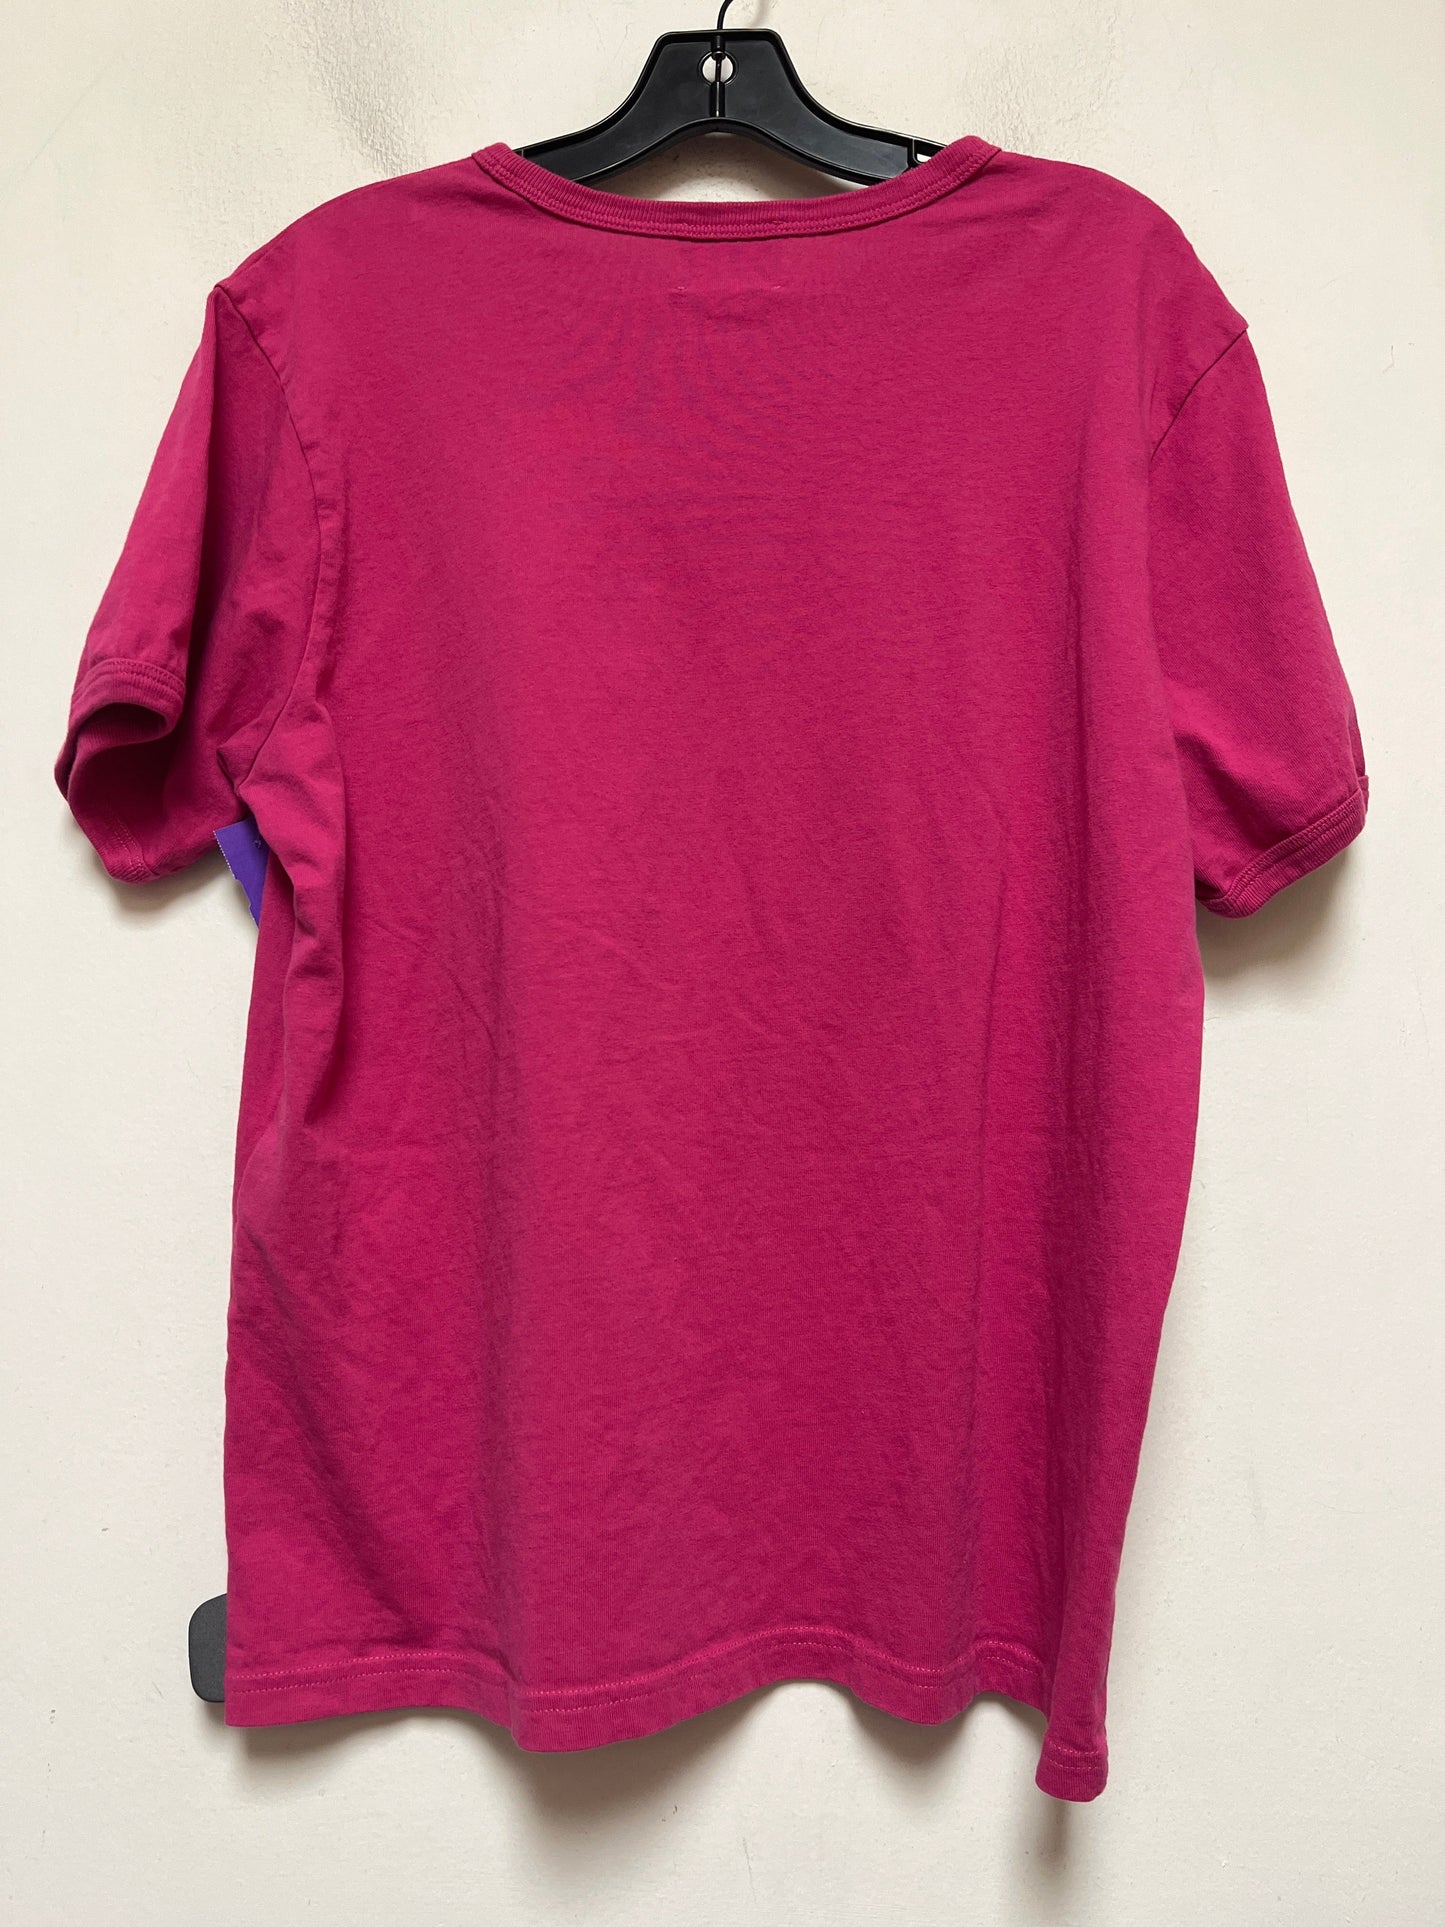 Pink Top Sleeveless Basic Marc Jacobs, Size M